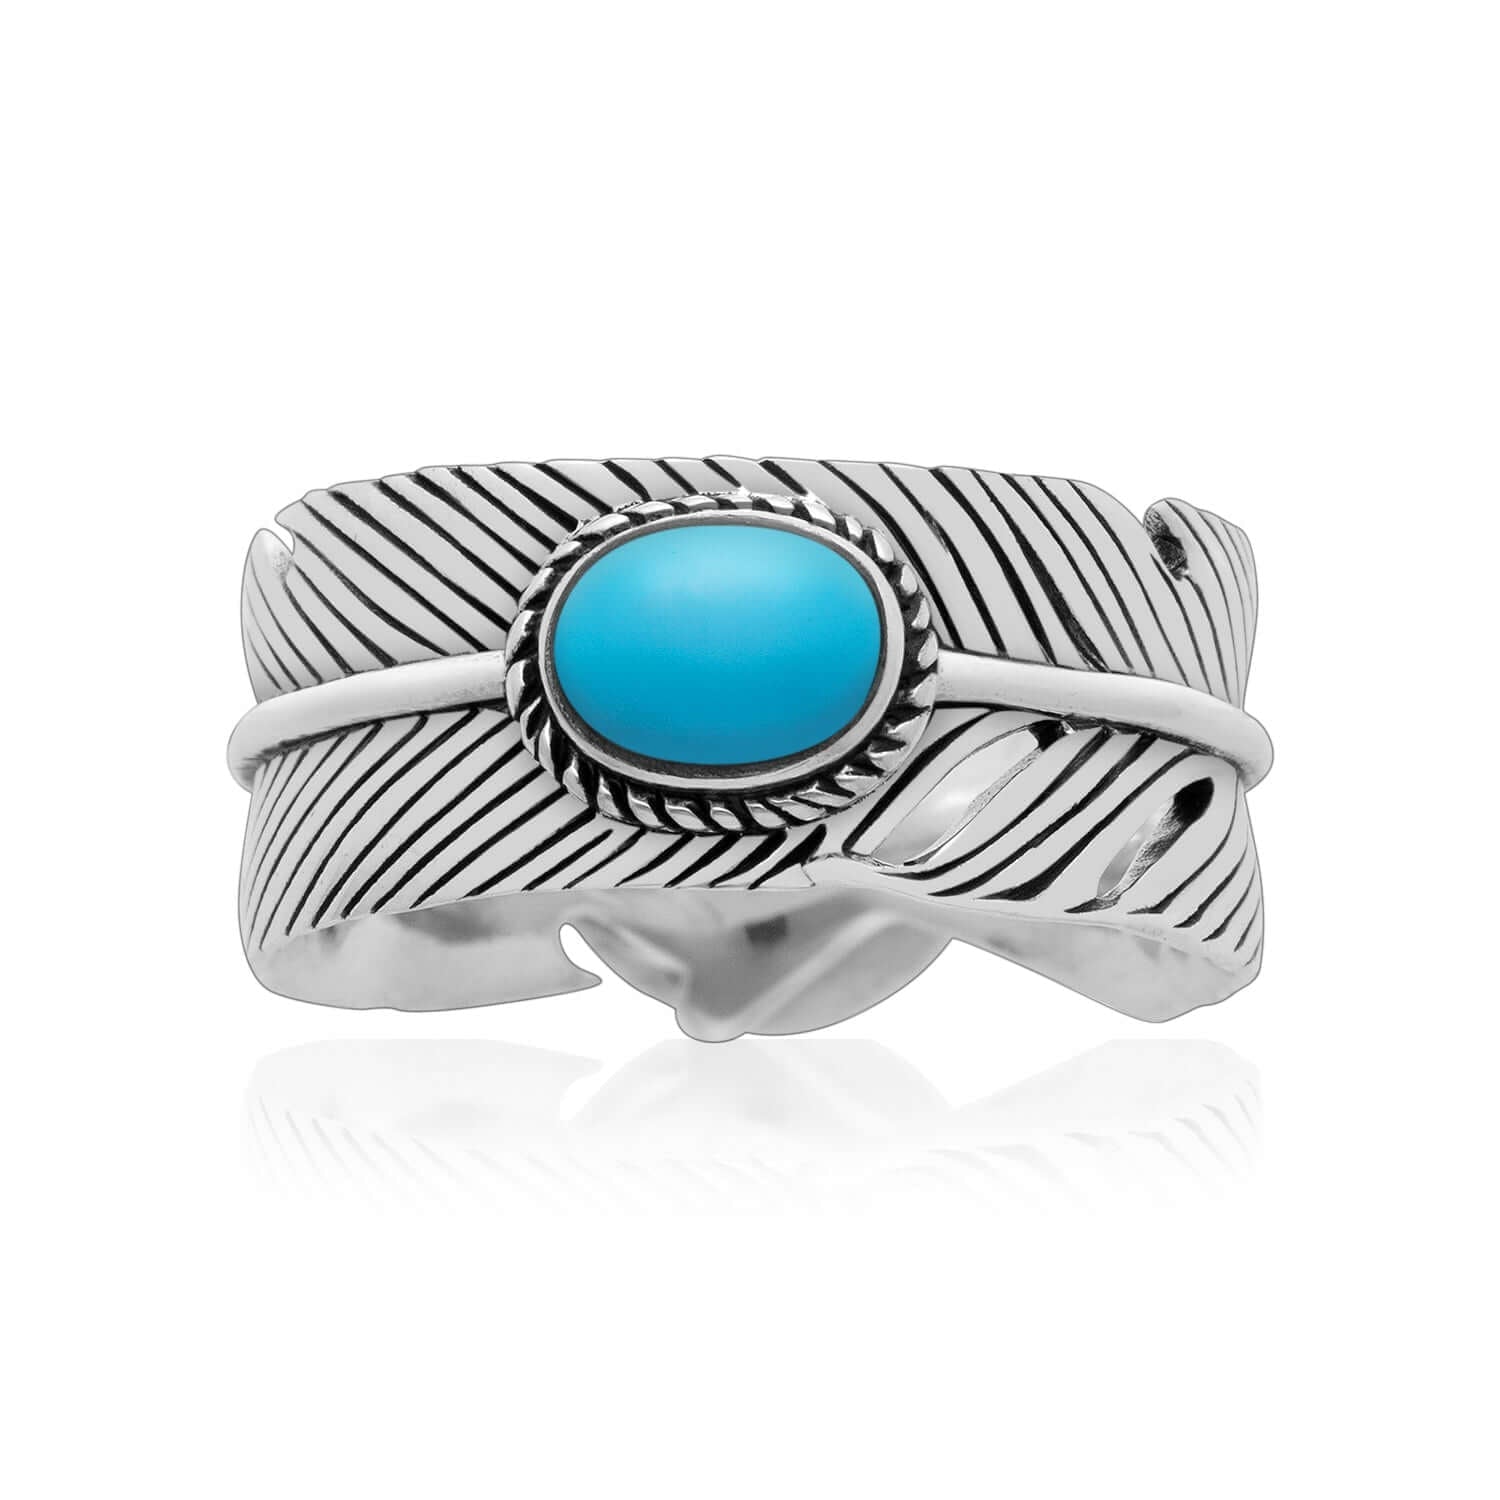 925 Sterling Silver Navajo Feather Ring with Turquoise - SilverMania925